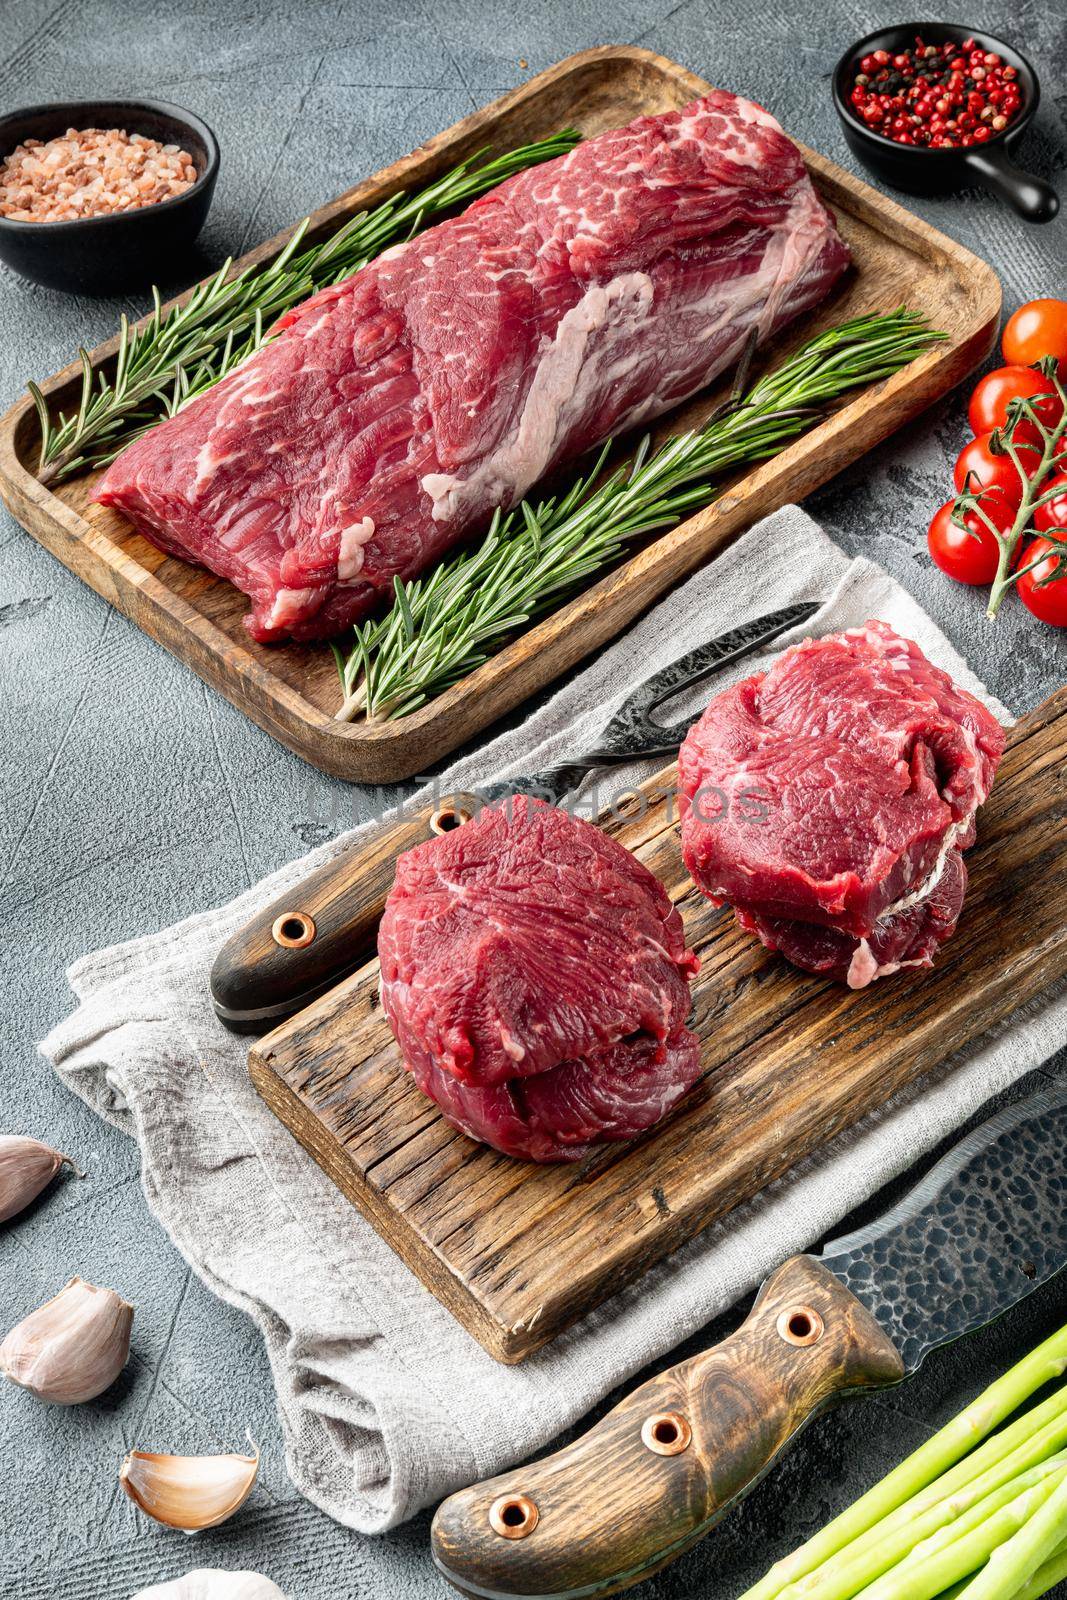 Raw fresh marbled meat Black Angus set, Filet mignon tenderloin cut, on wooden cutting board, on gray stone background